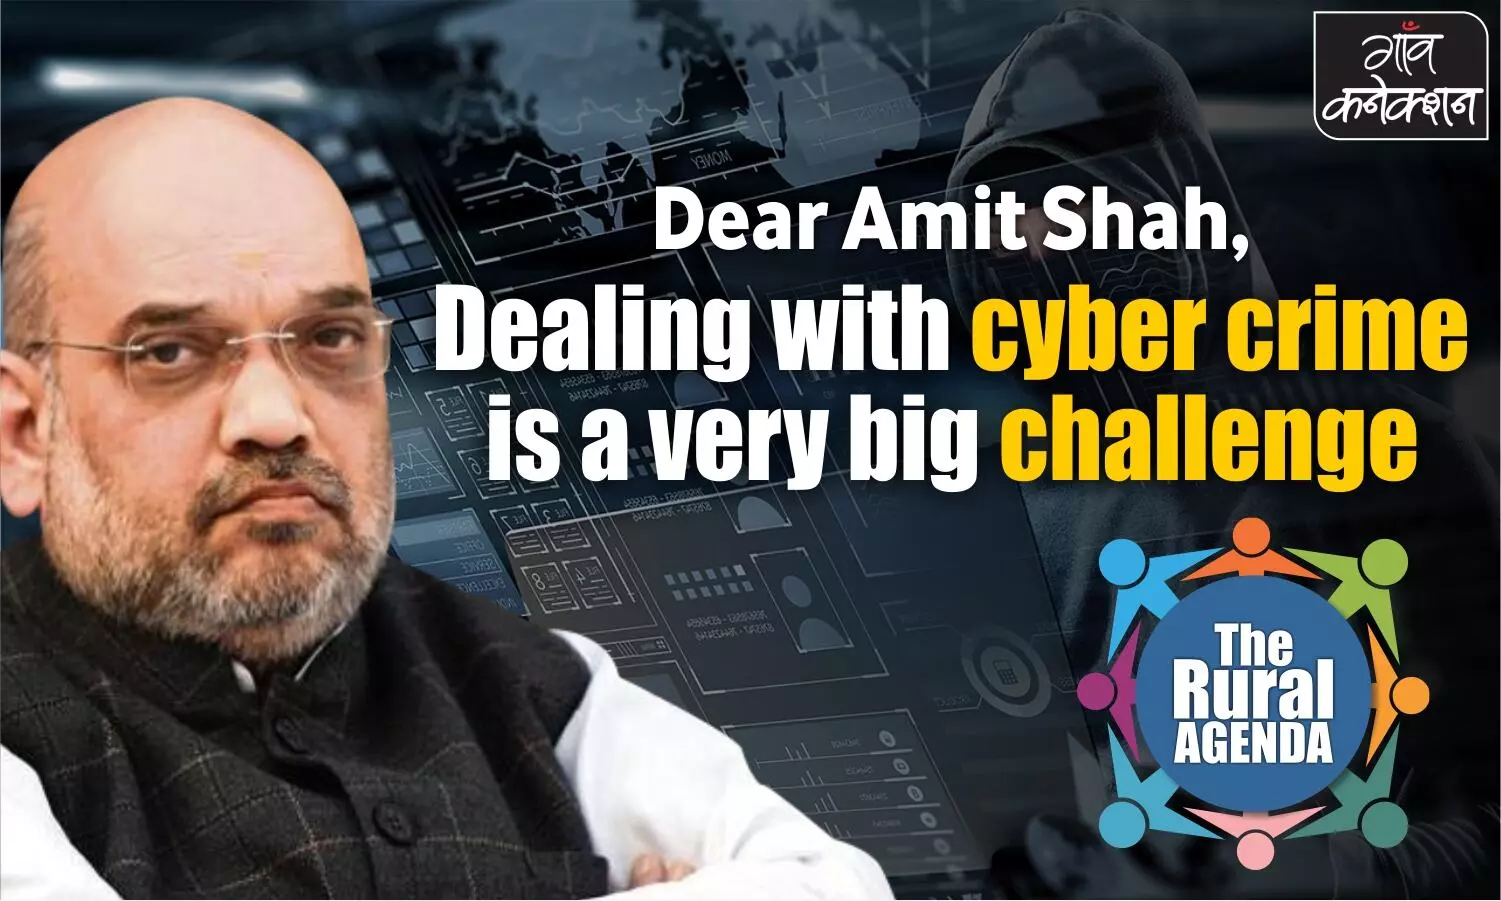 Dear Amit Shah, Digital India is great, but please deal with cyber-crime too